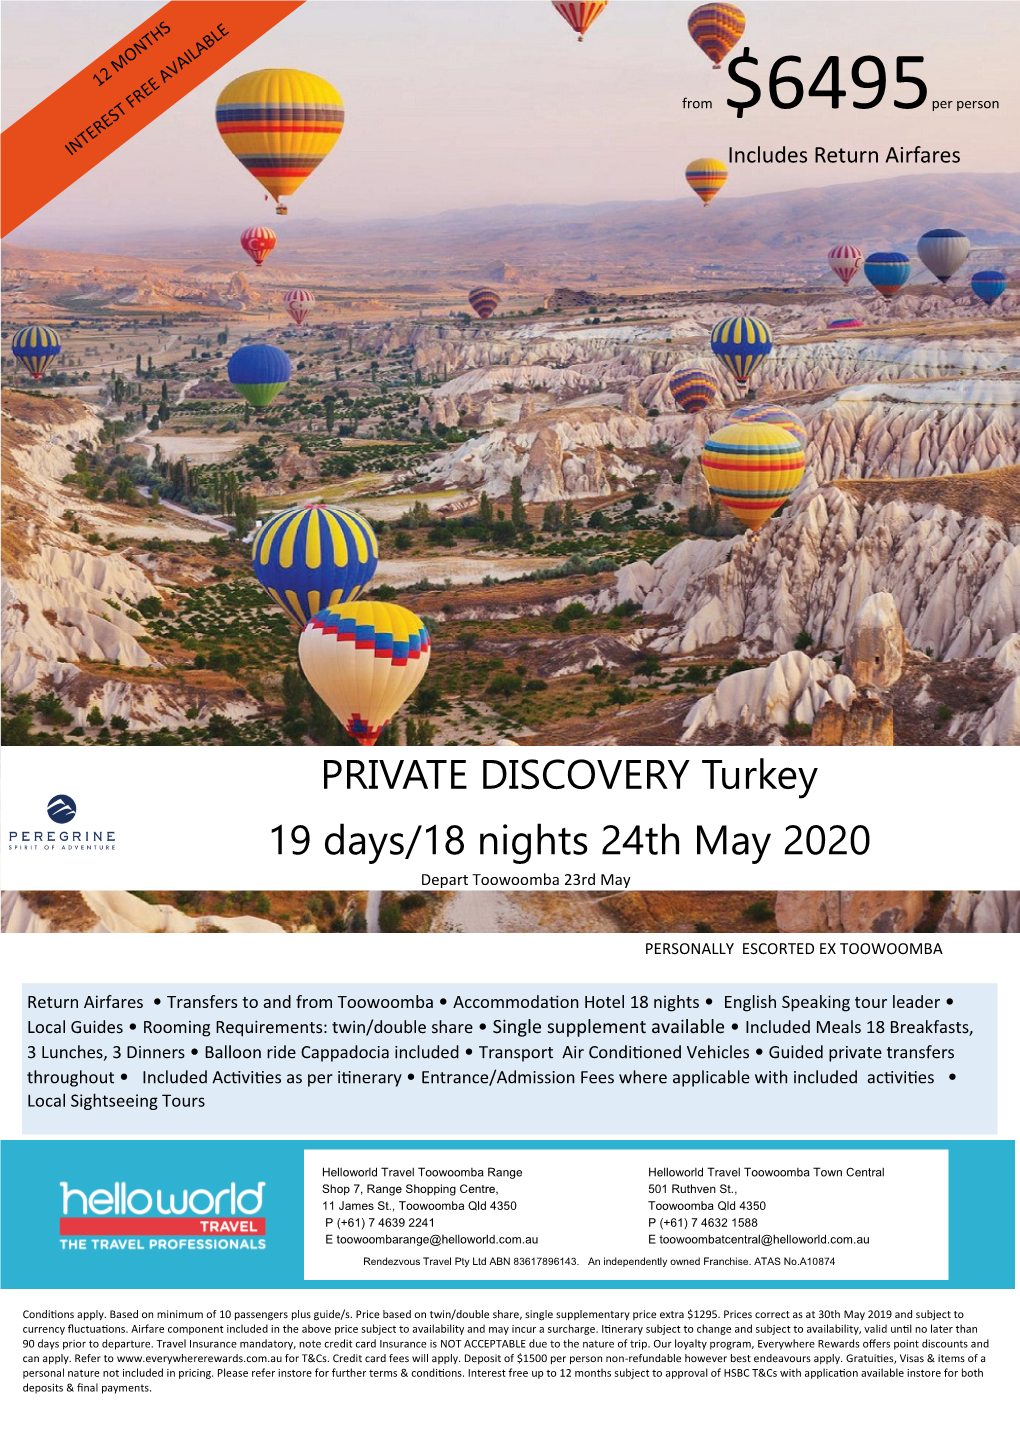 PRIVATE DISCOVERY Turkey 19 Days/18 Nights 24Th May 2020 ������������������������